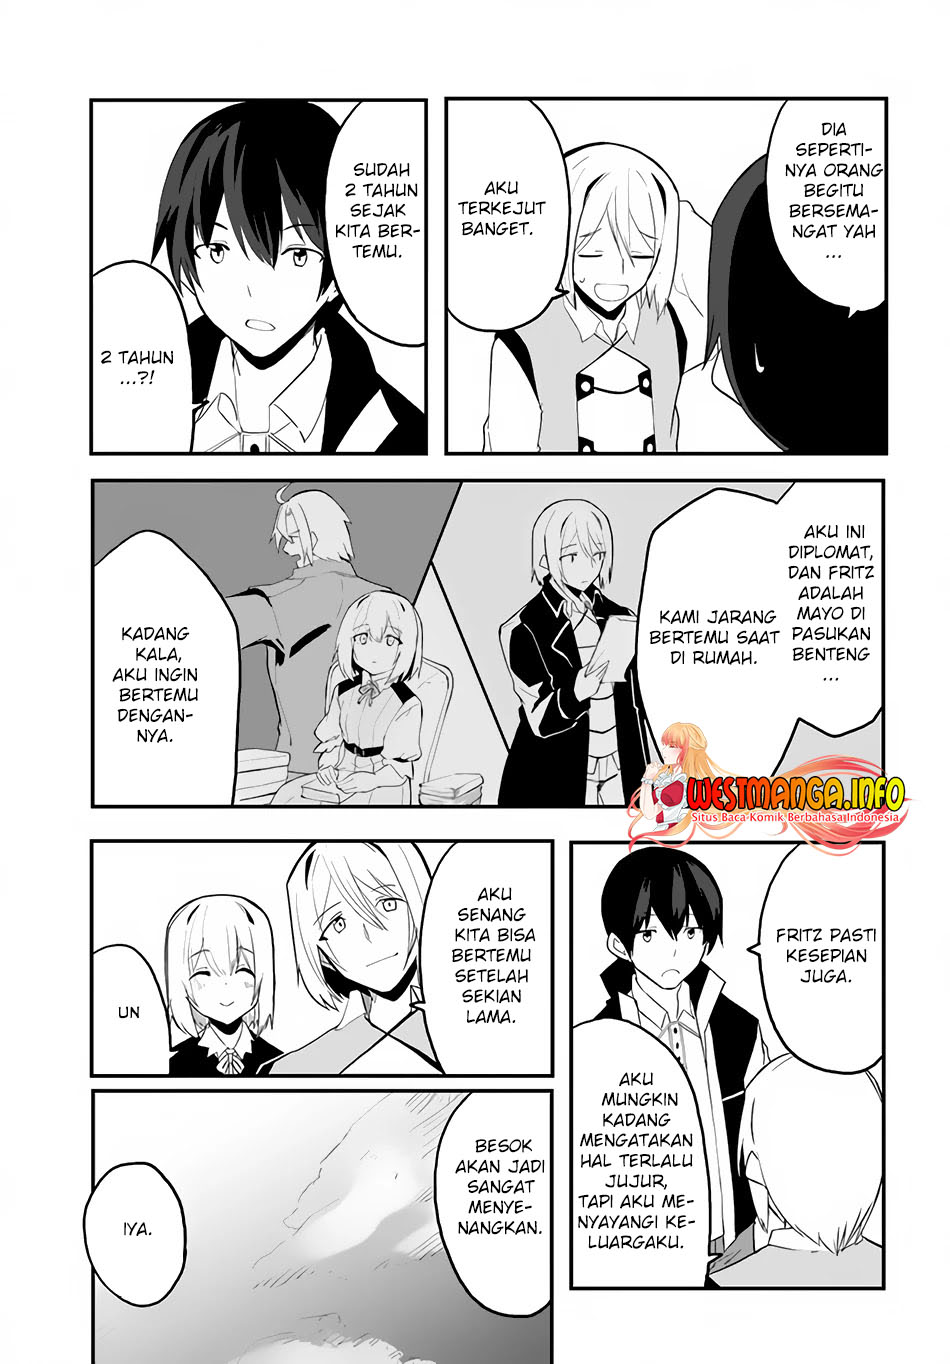 Magi Craft Meister Chapter 42